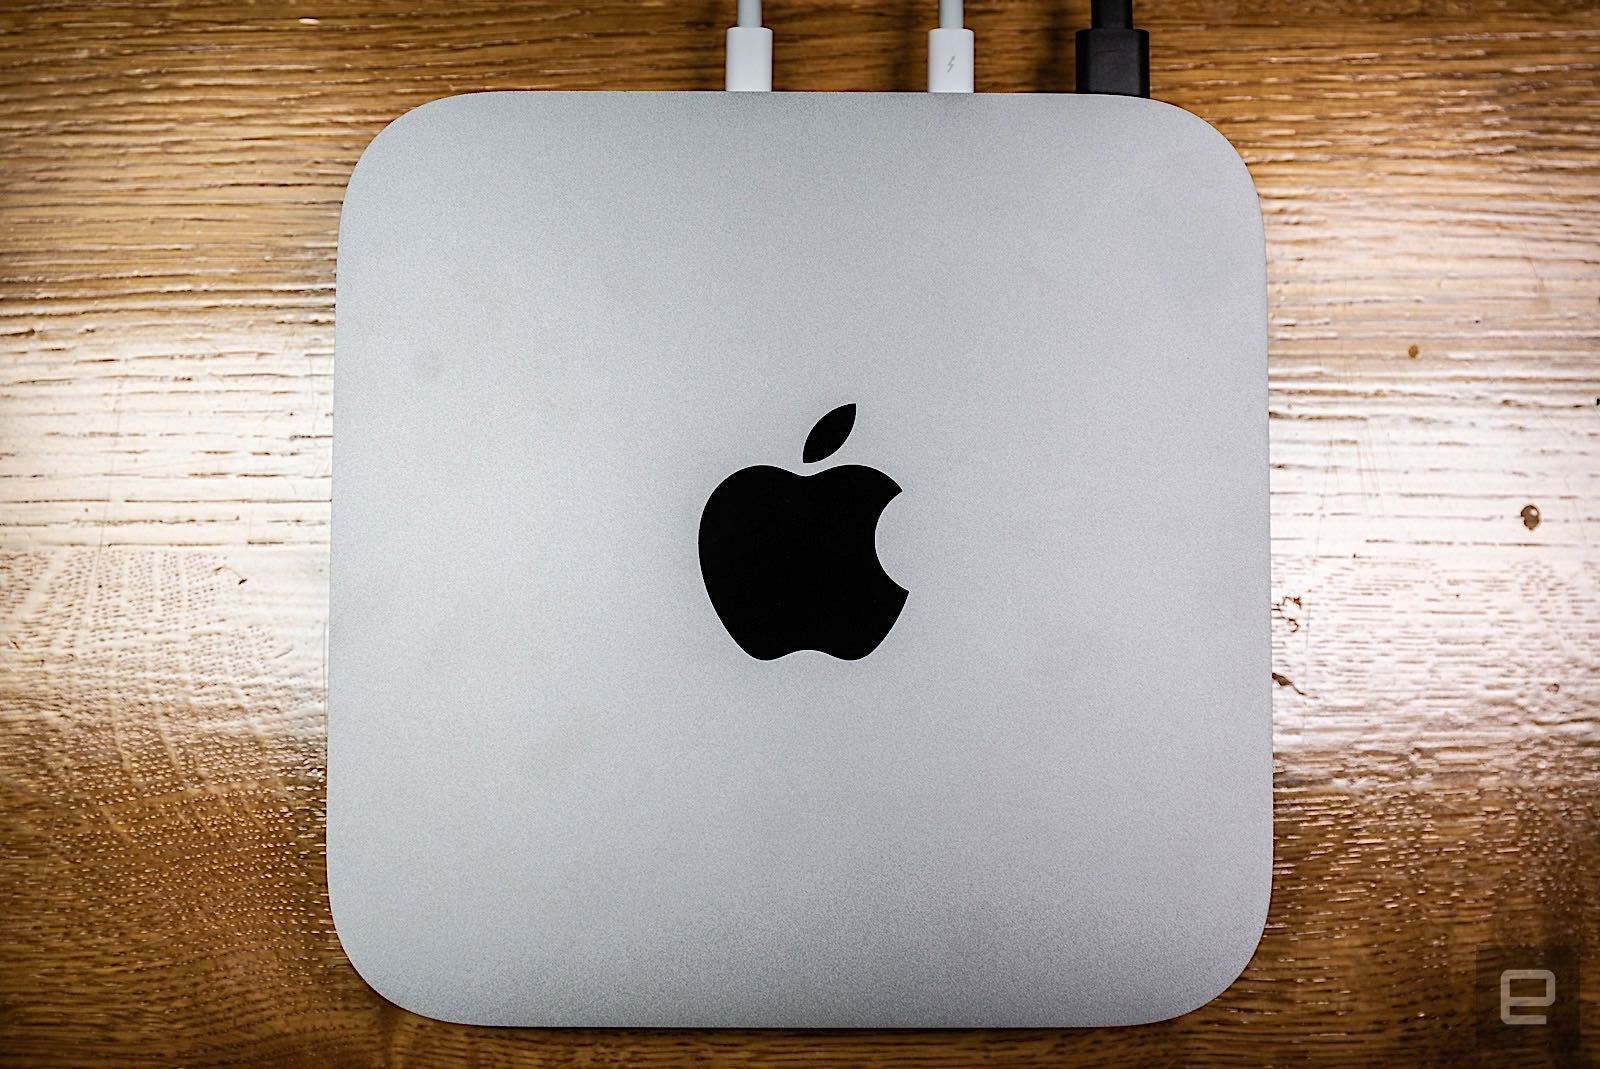 Intel-powered Mac Minis are cheaper than ever on Amazon | DeviceDaily.com